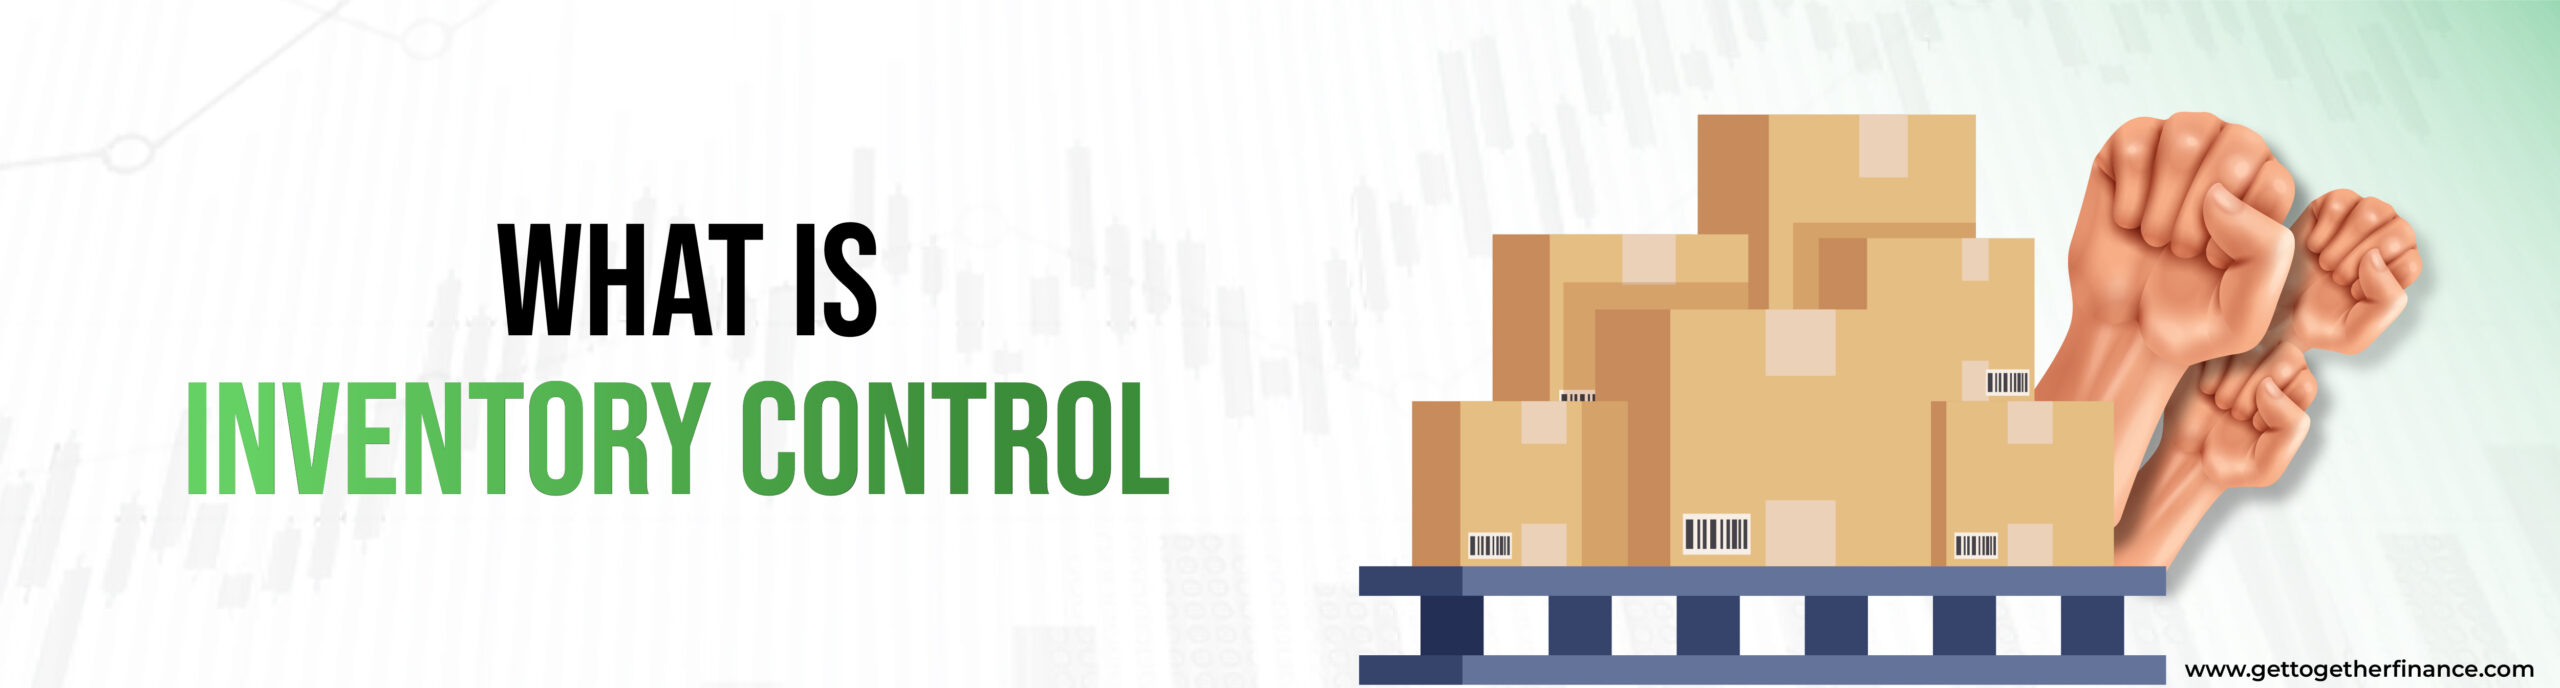 what is inventory control